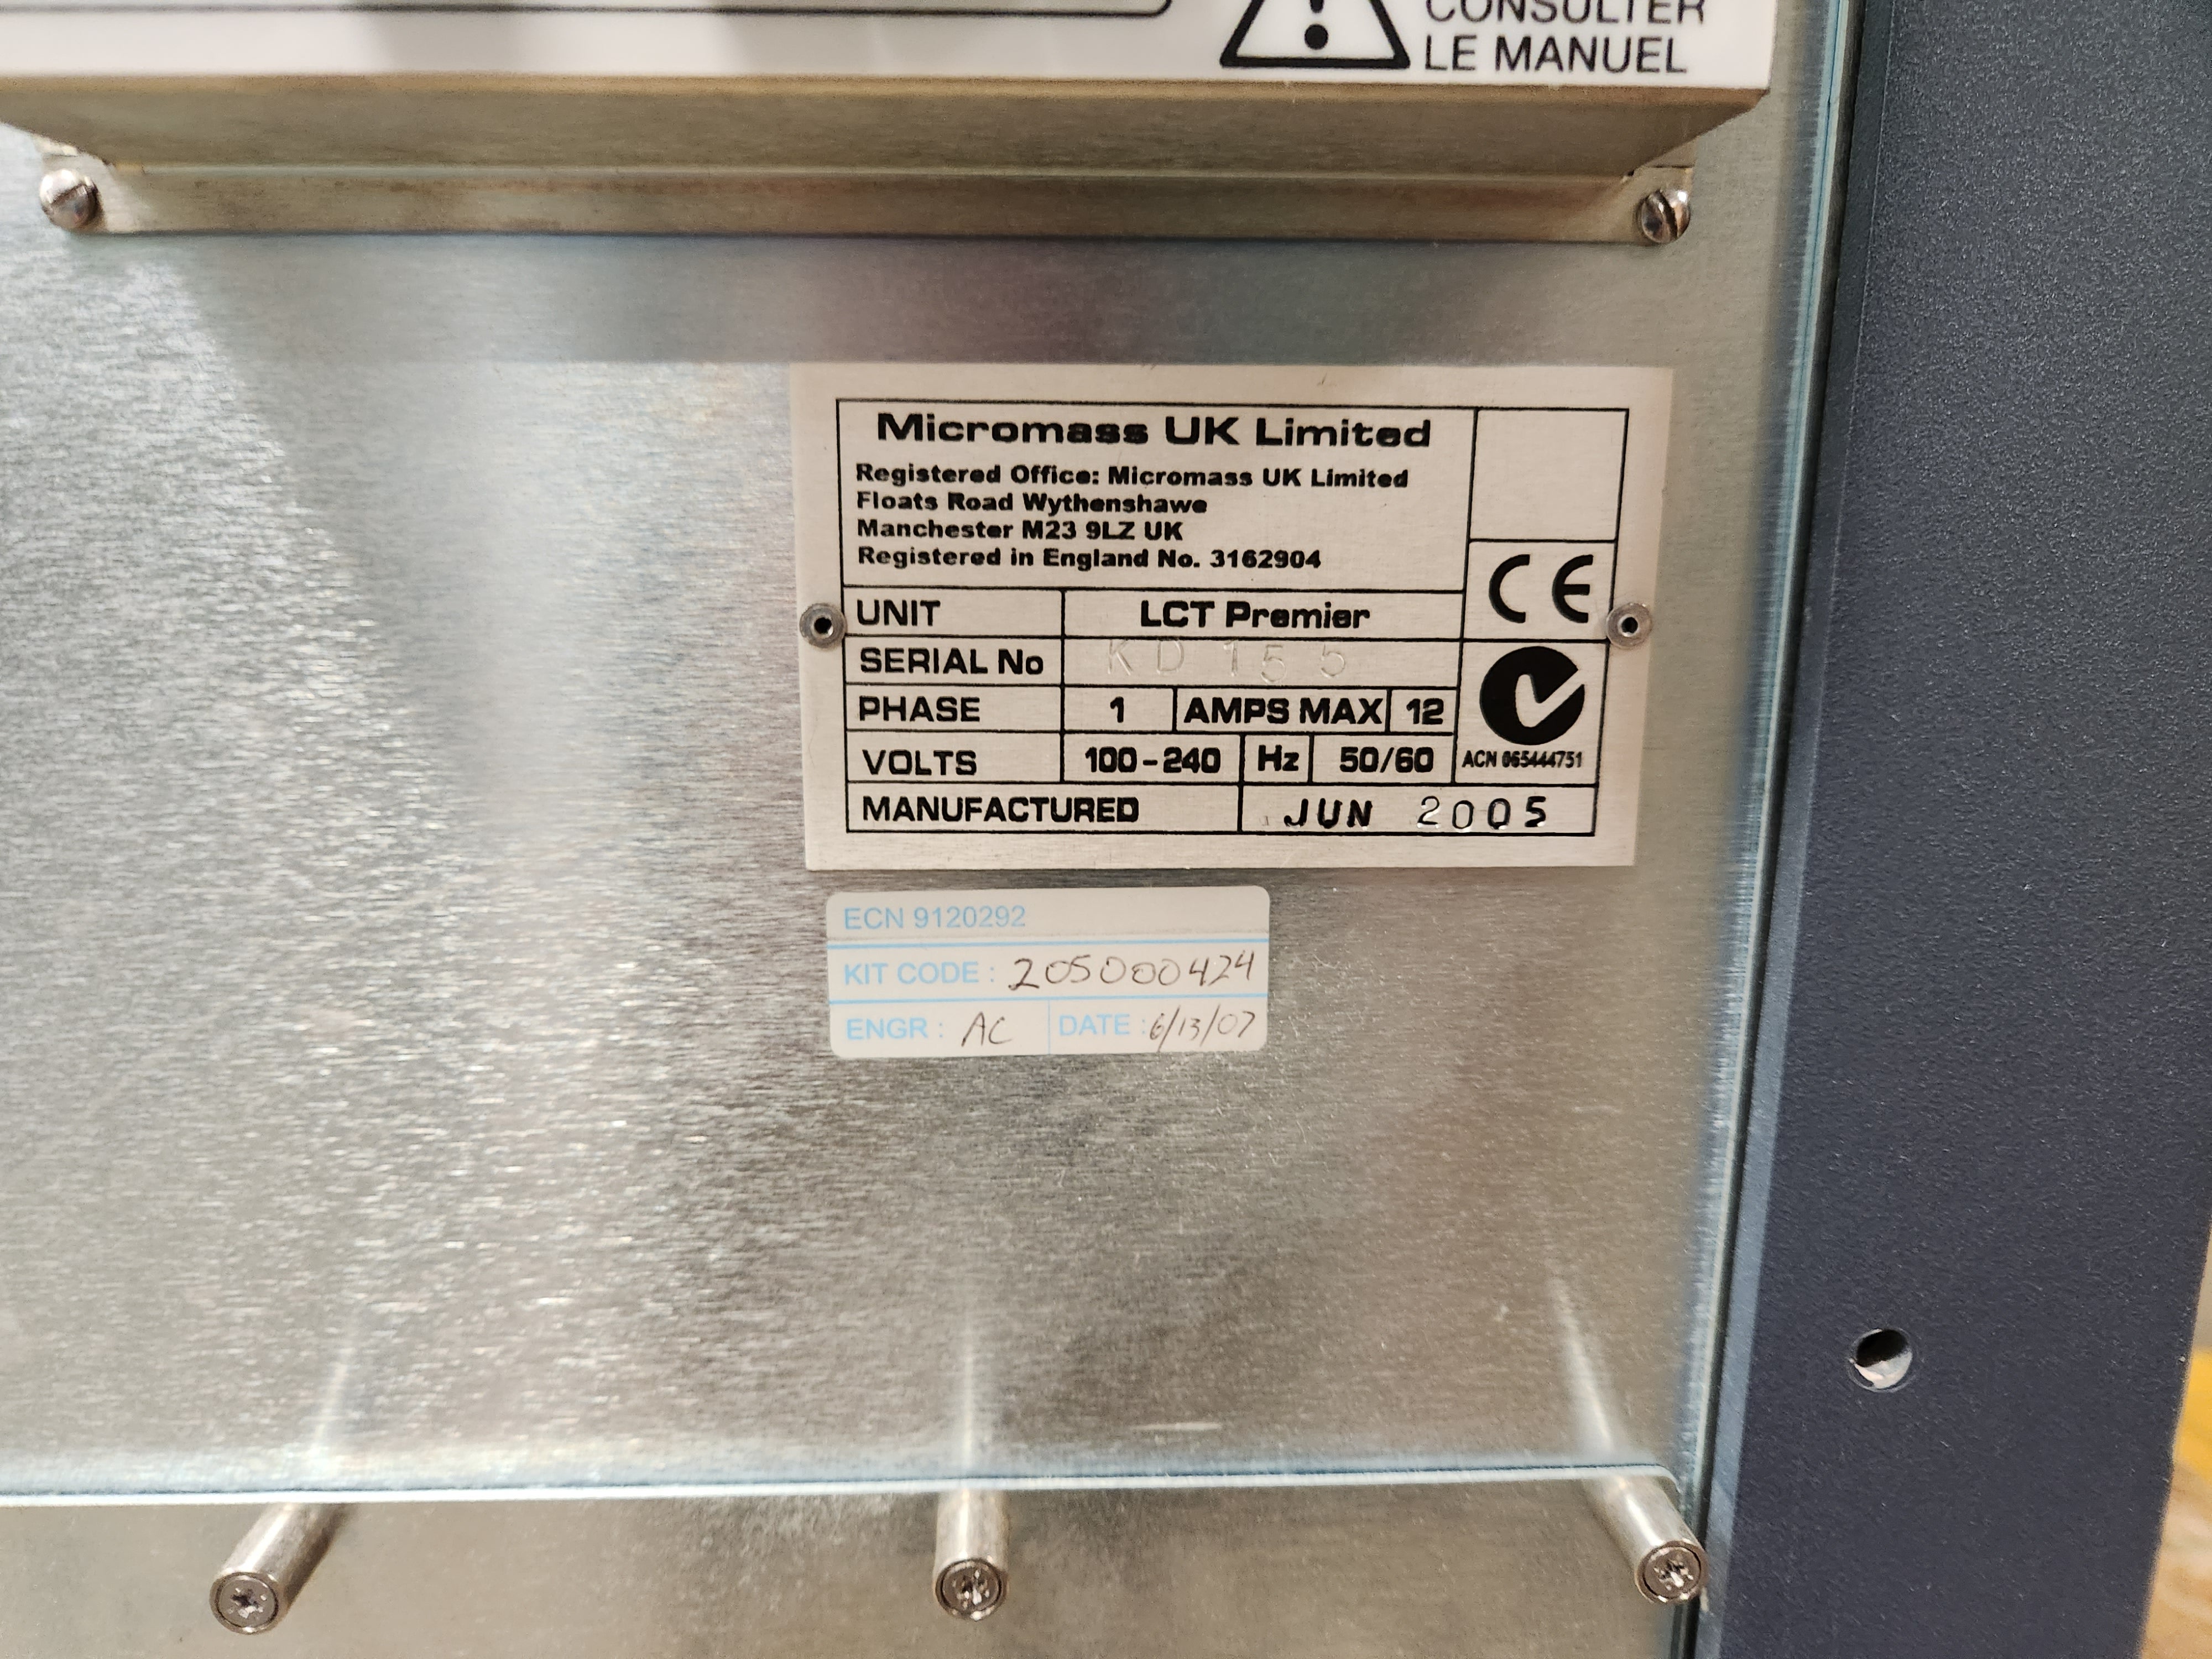 Waters LCT Premier Micromass Mass Spectrometer